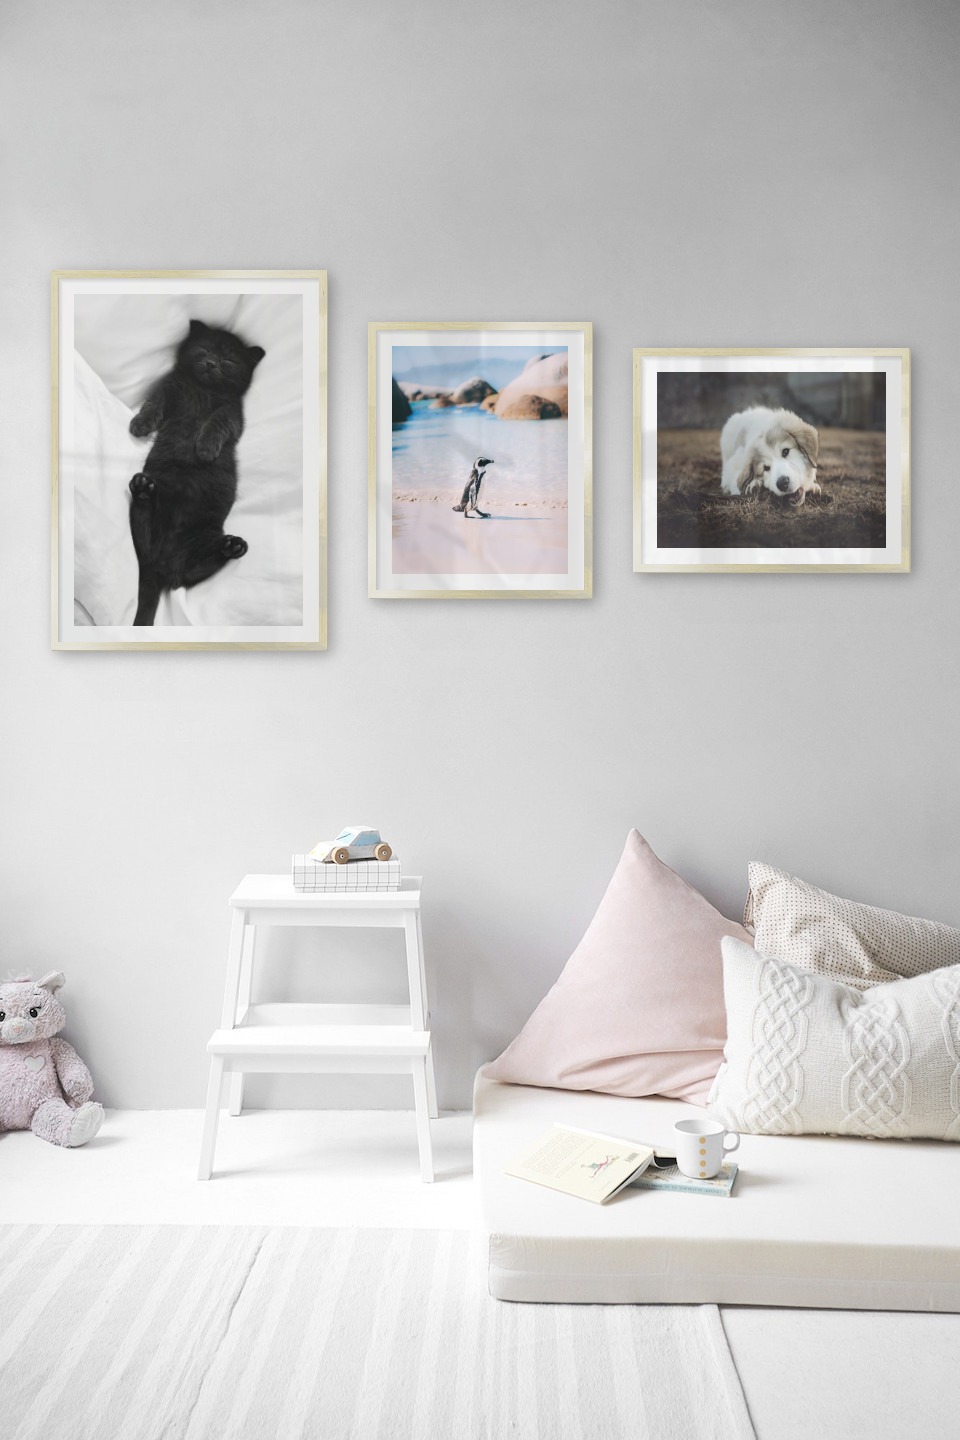 Gallery wall with picture frames in gold in sizes 50x70 and 40x50 with prints "Cat in bed", "Penguin on the beach" and "Dog chewing"